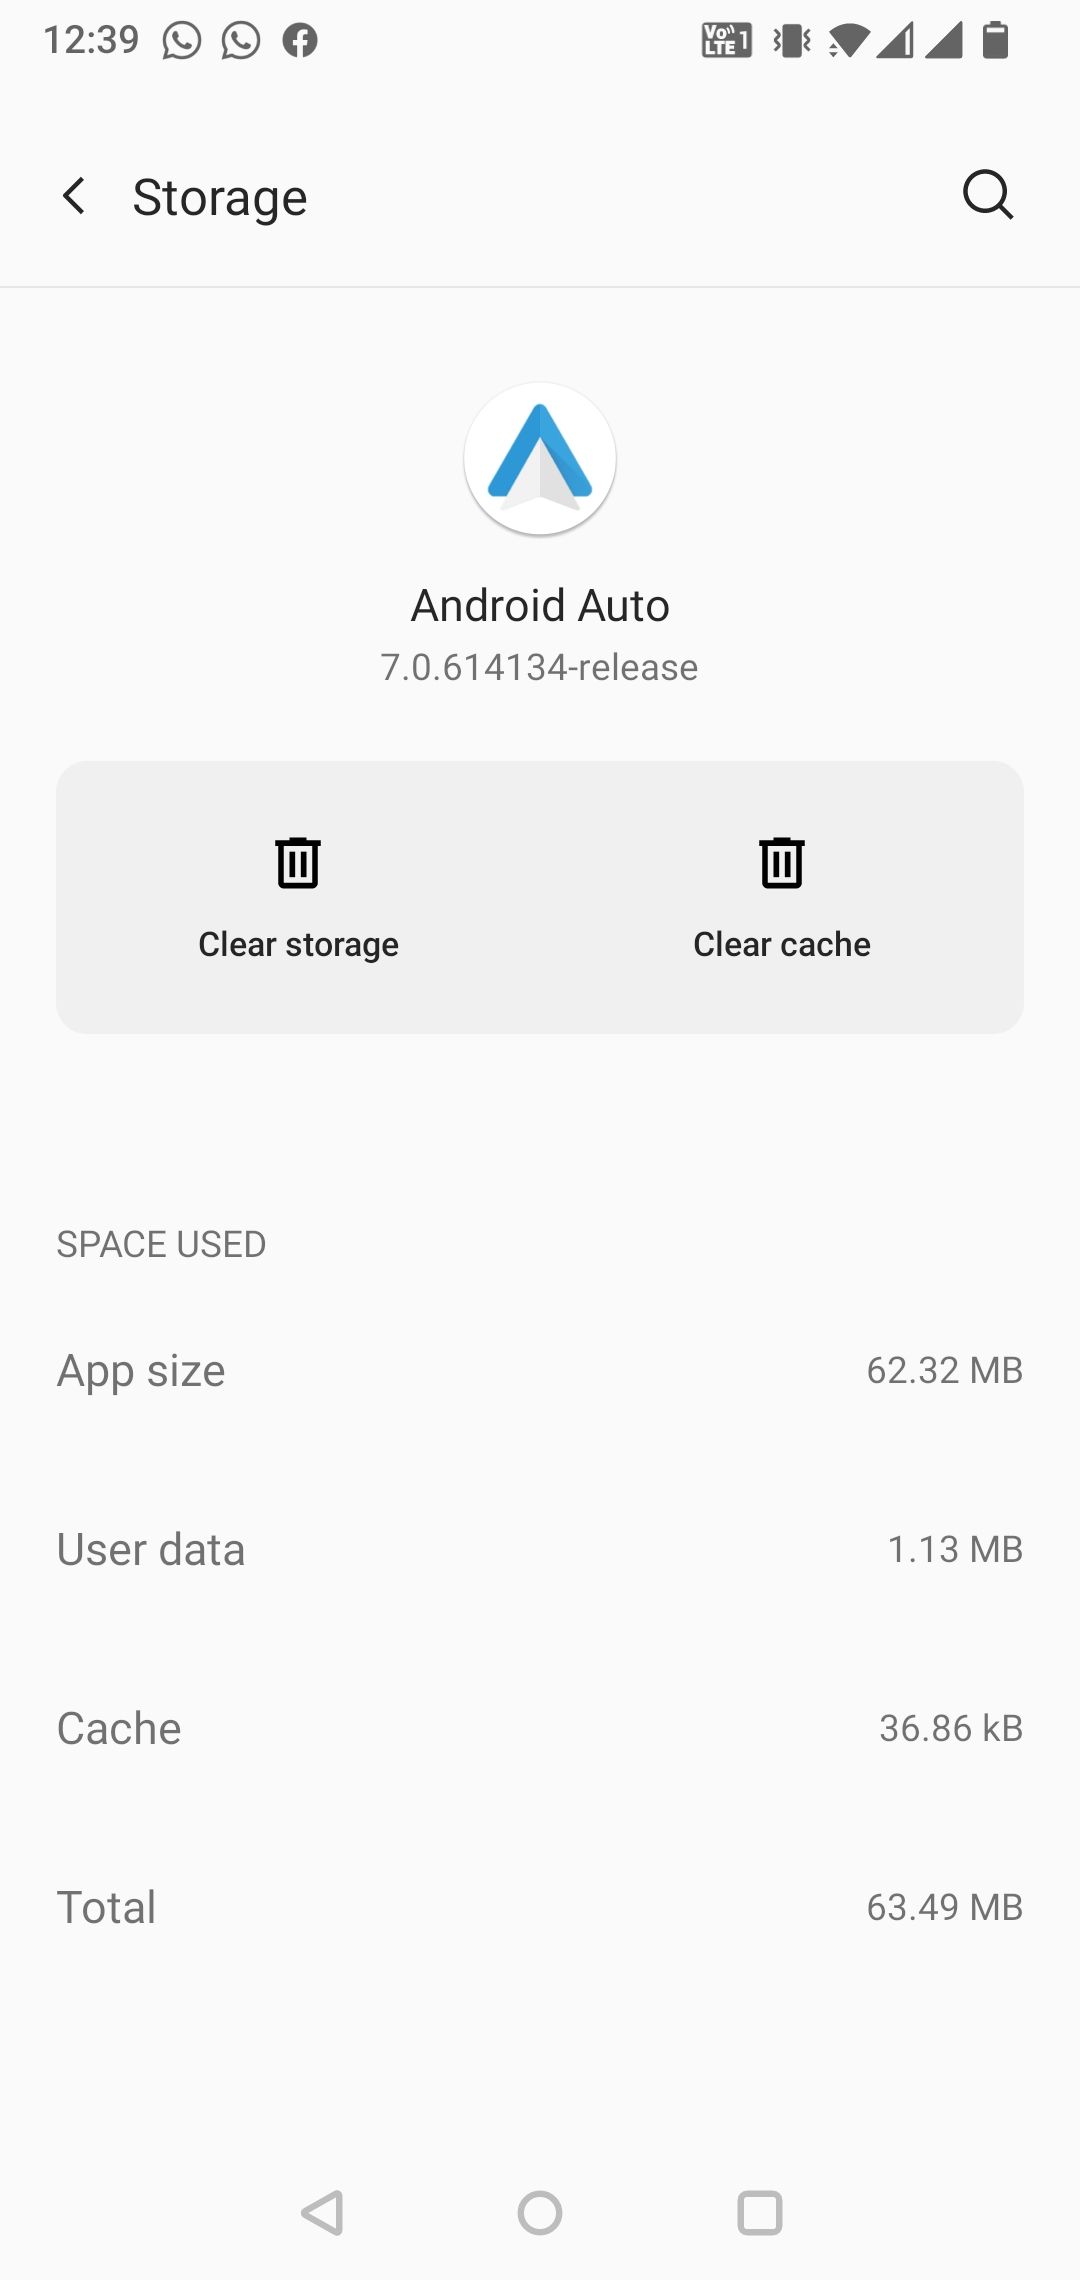 Screenshot shows the Storage page for Android Auto. Clear storage and Clear cache are options displayed near the top.